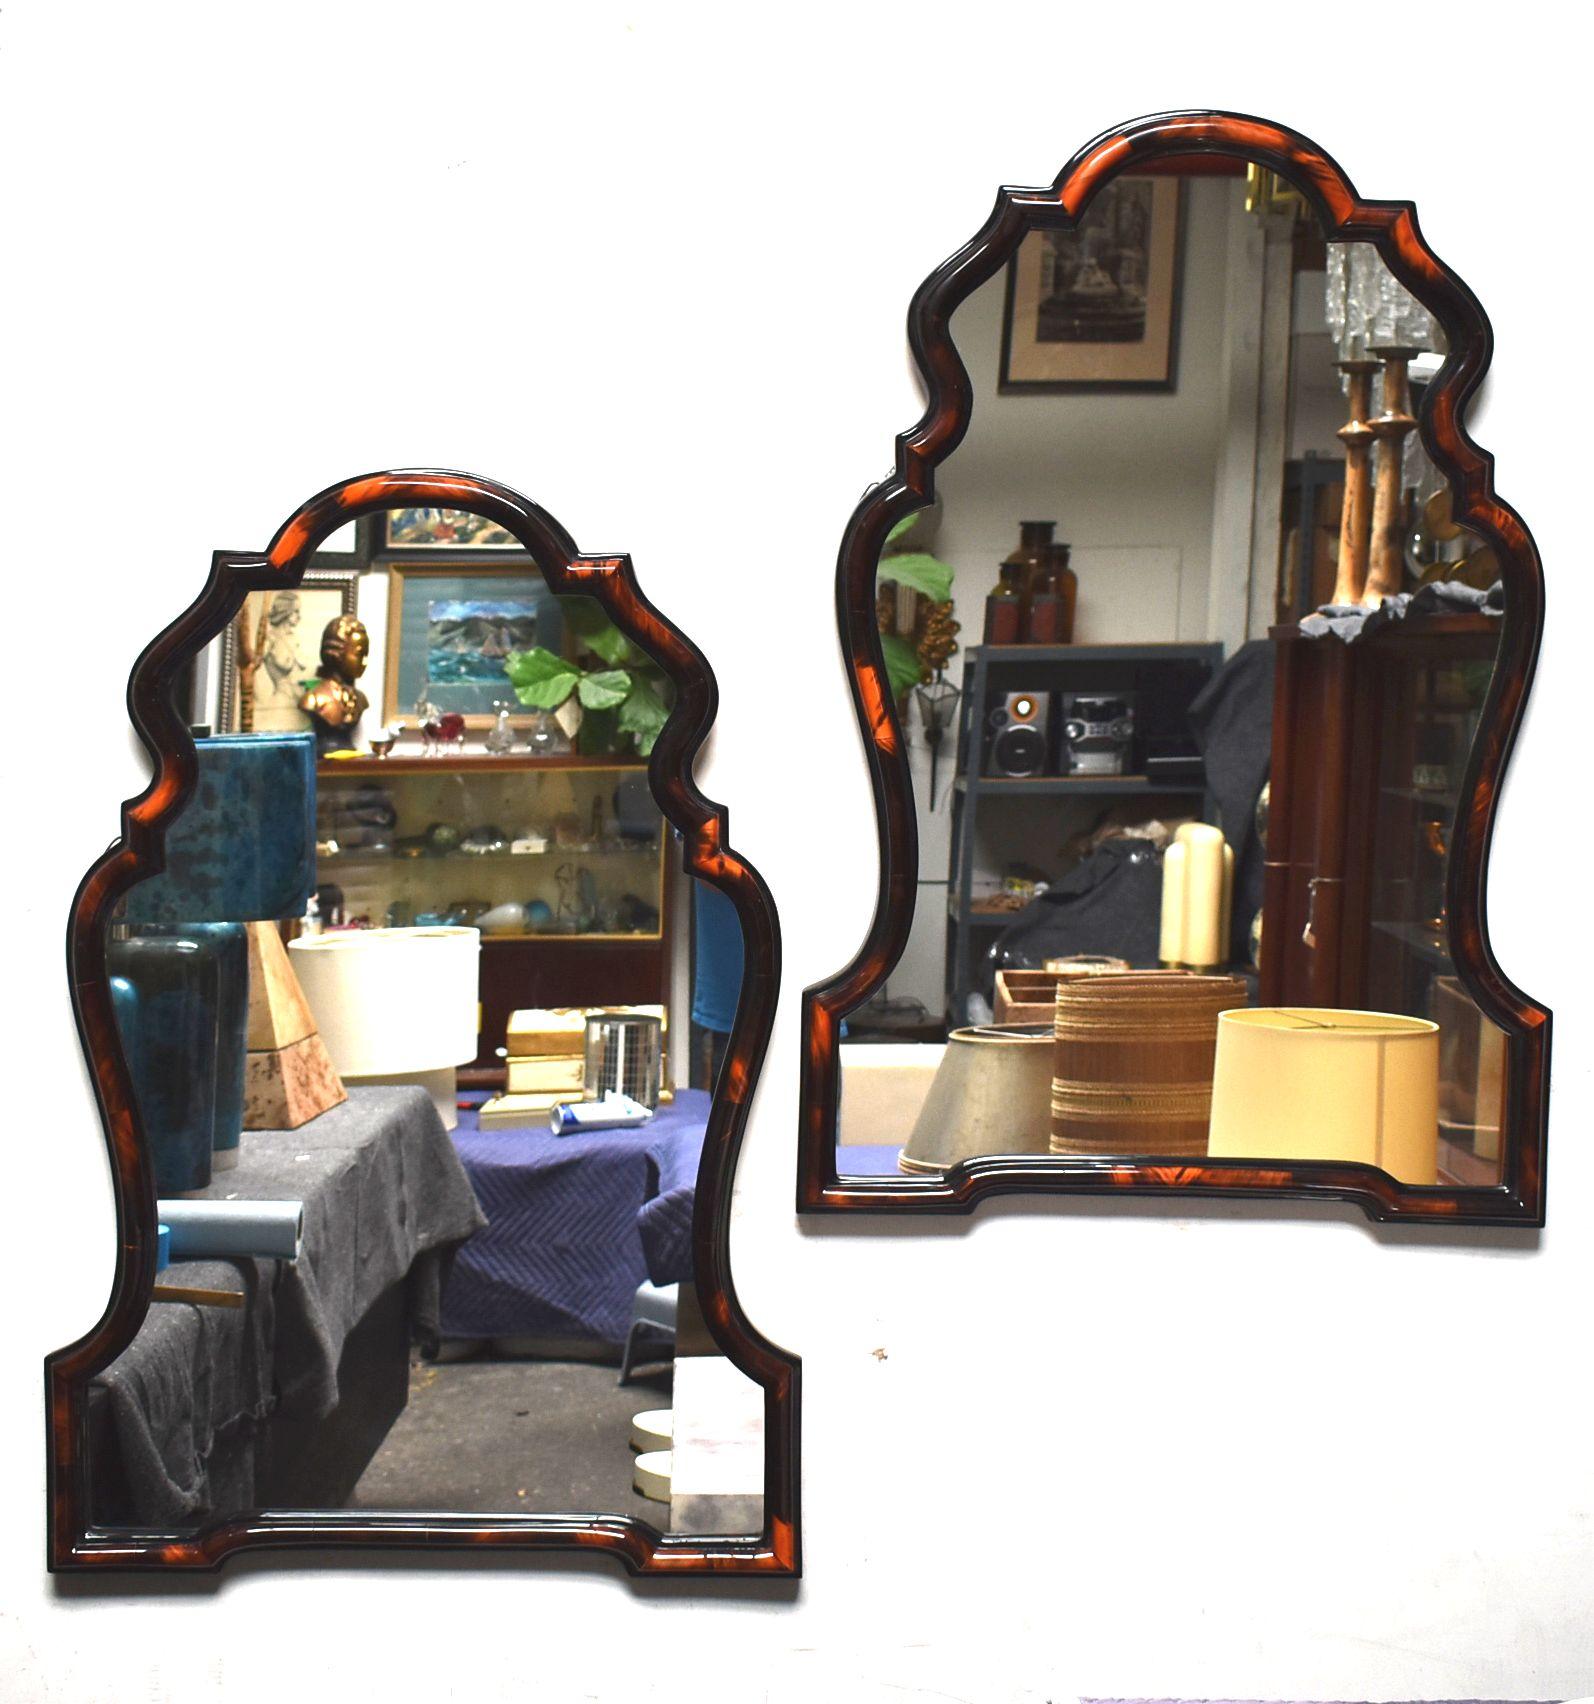 Pair of mirrors cover with red horn and high gloss polyester resin filled finish.

Additional dimensions of mirror frame:
Width top 23 inches
Width middle 28 inches
Width bottom 30 inches.